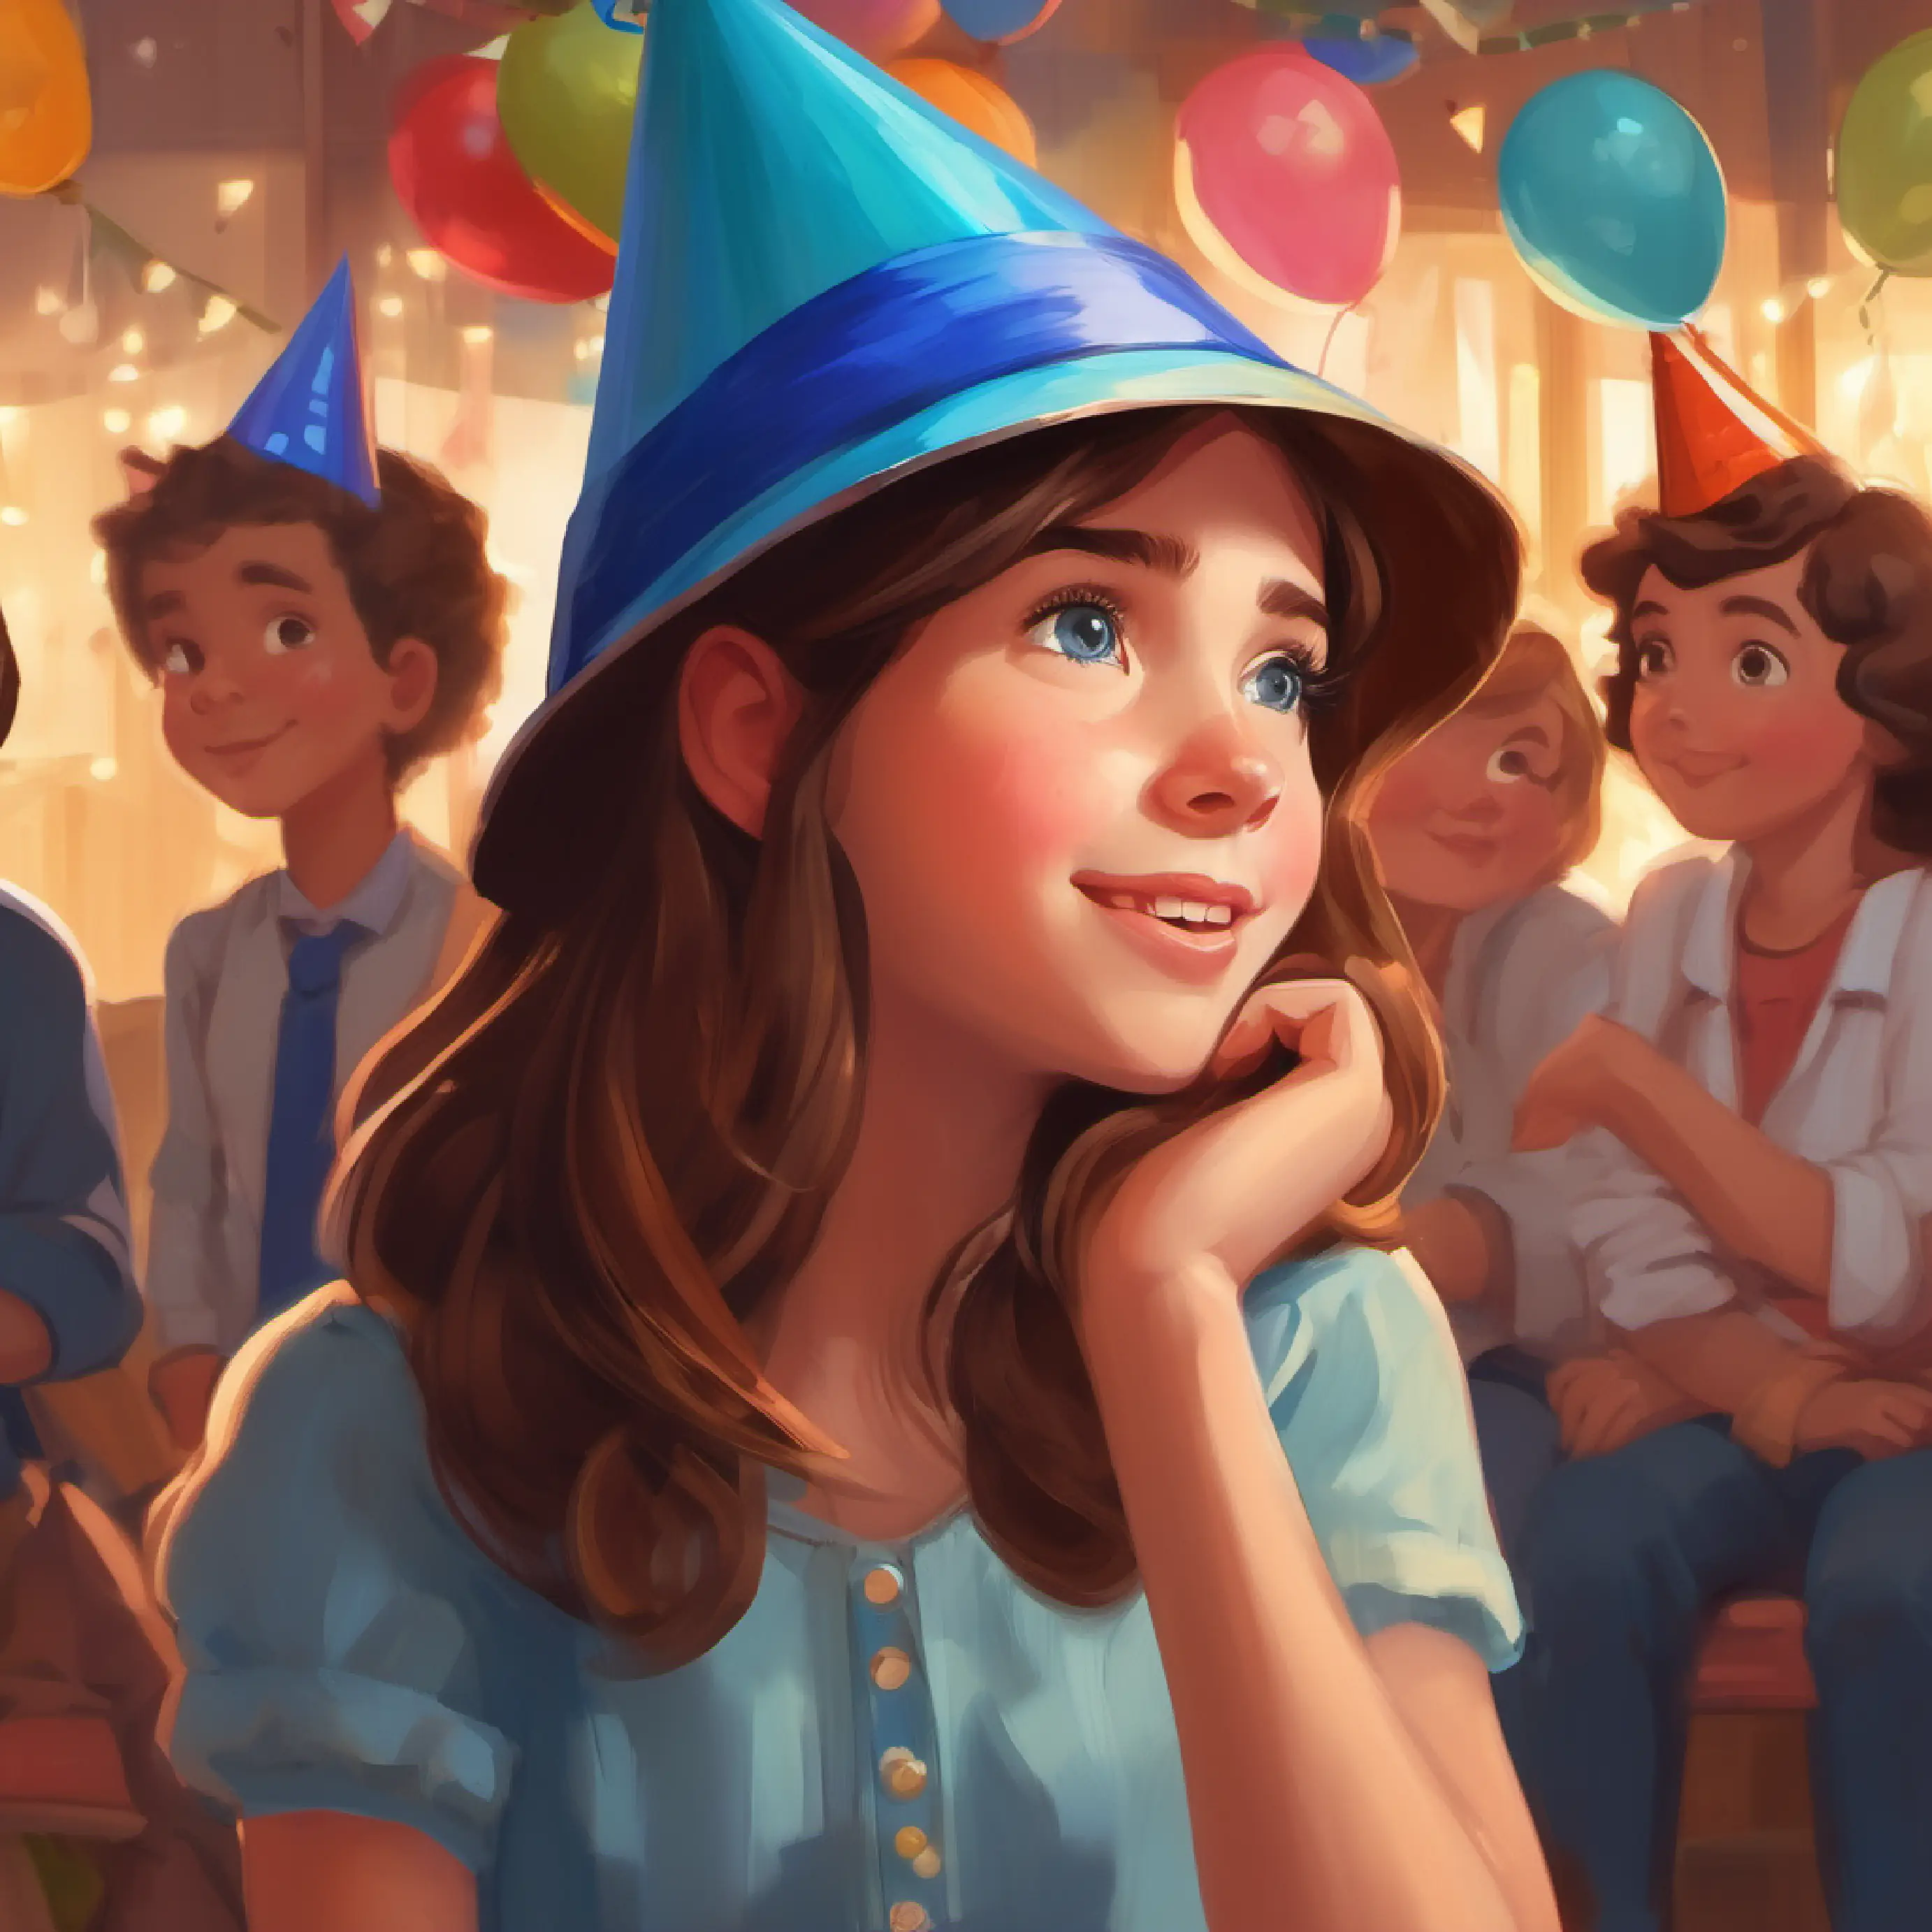 Girl with brown hair, blue eyes, wearing a party hat invites her eight friends, indoors.